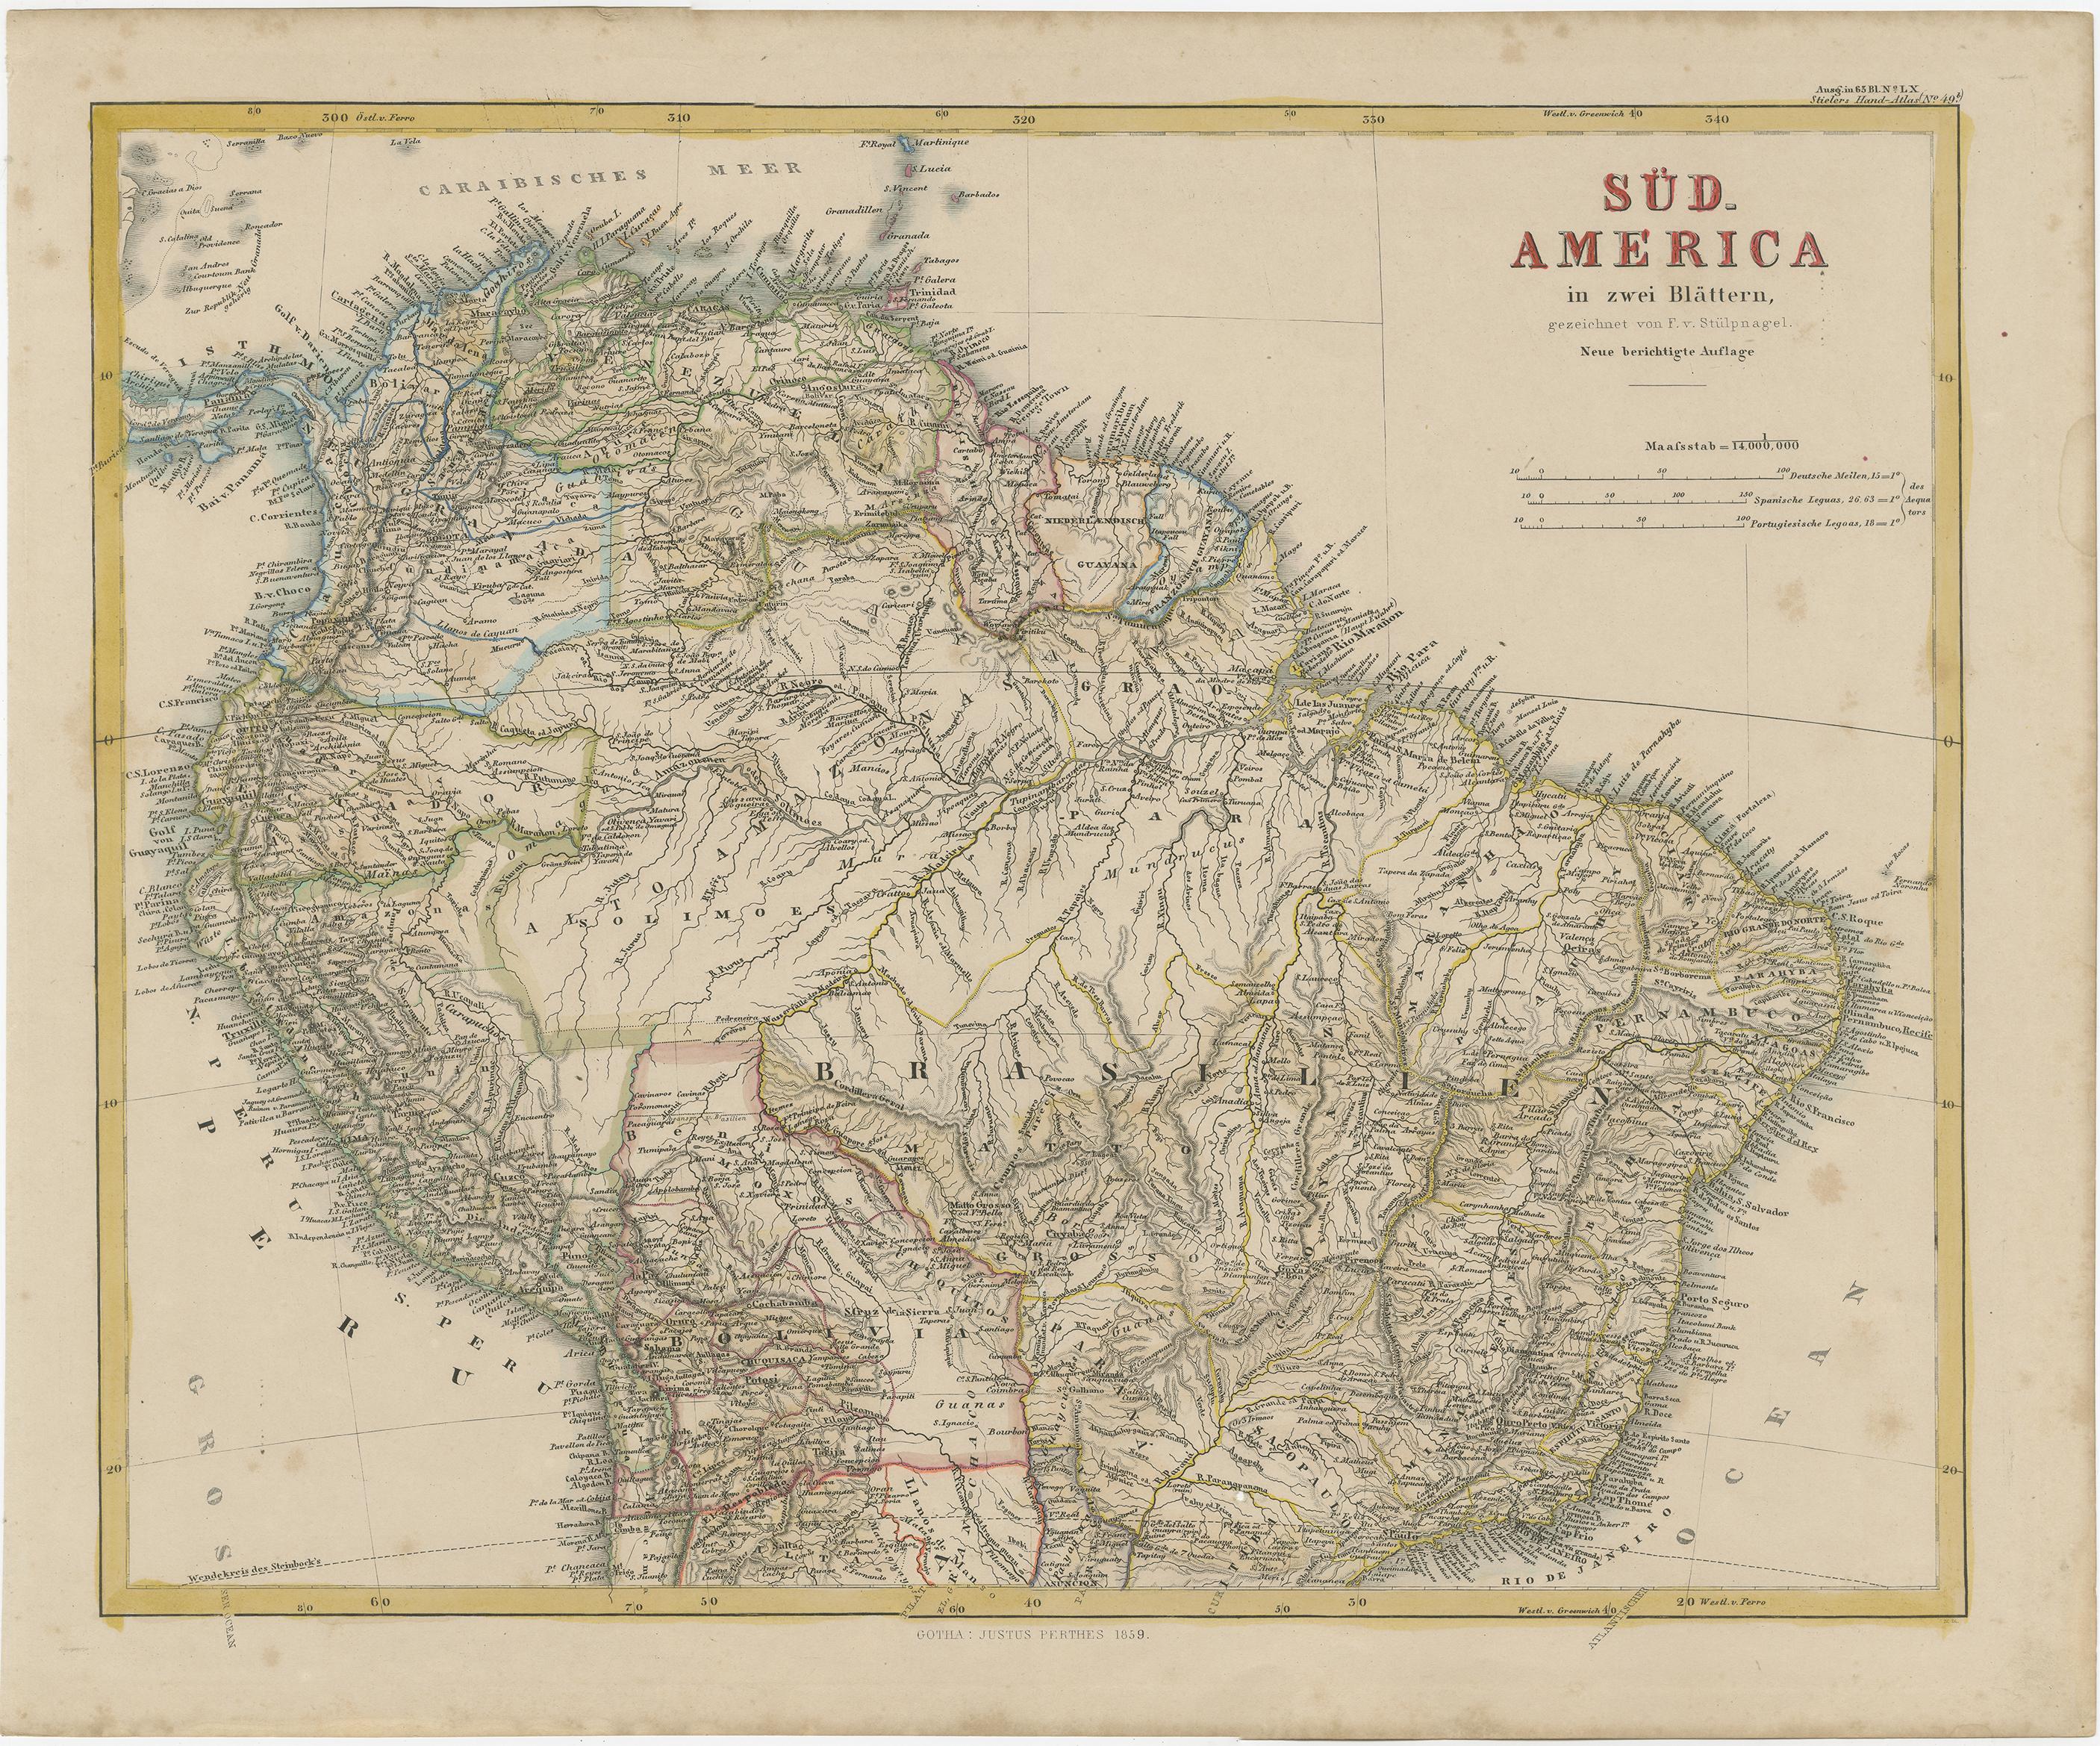 Set of two antique maps titled 'Süd-America in zwei Blättern'. Two individual sheets of South America. With inset maps of Rio de Janeiro and the Bay of Rio de Janeiro. 

This map originates from Stielers Handatlas, published circa 1859. Stielers